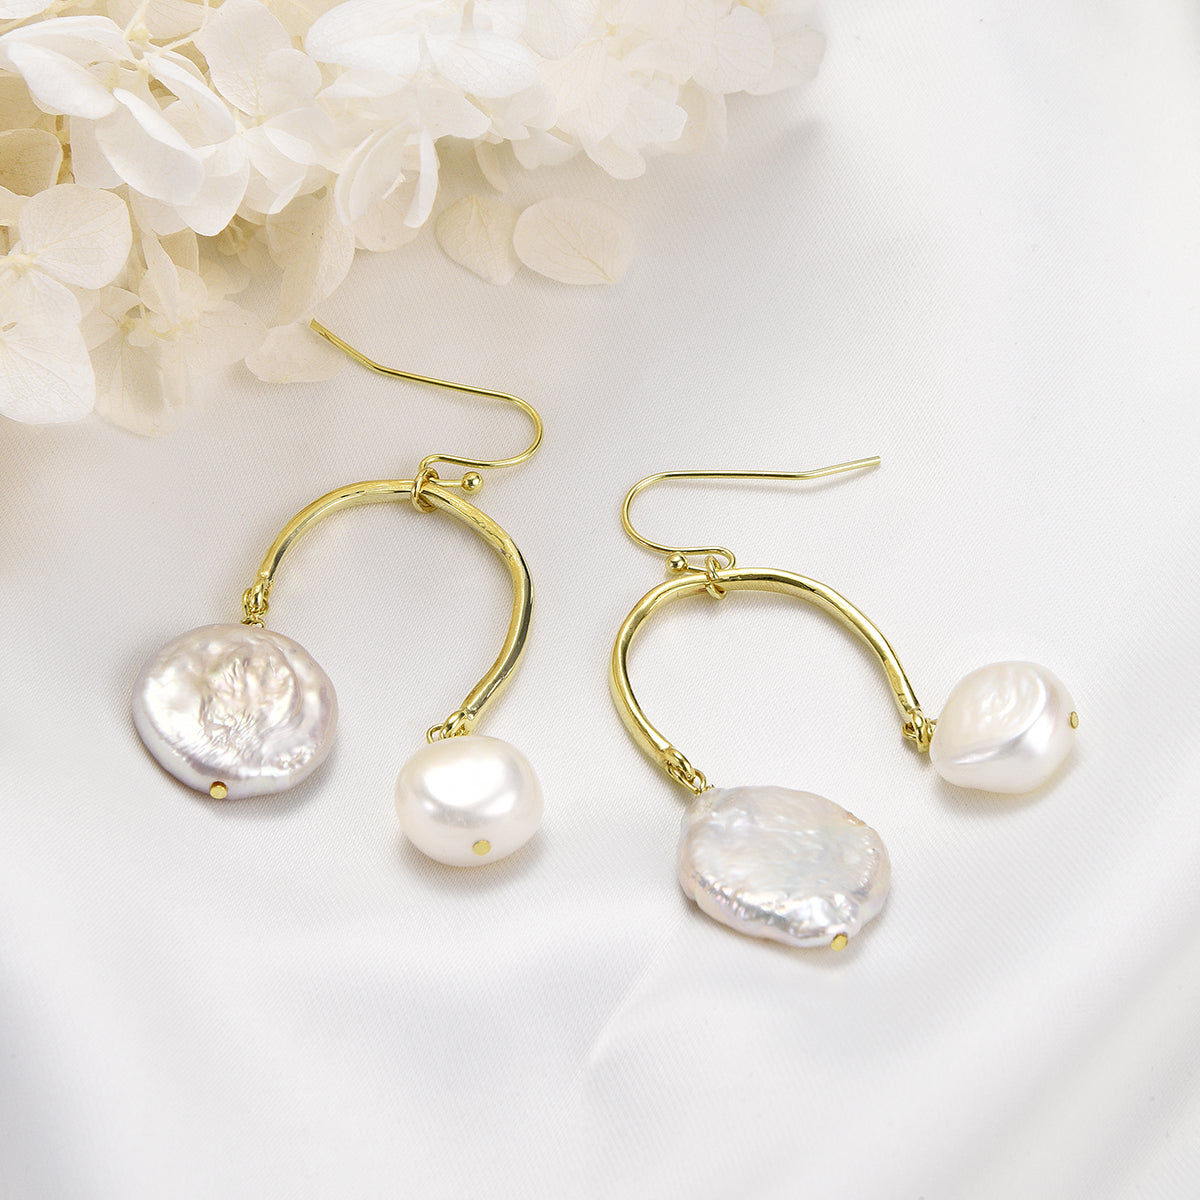 Twinning golden earrings with white pearls